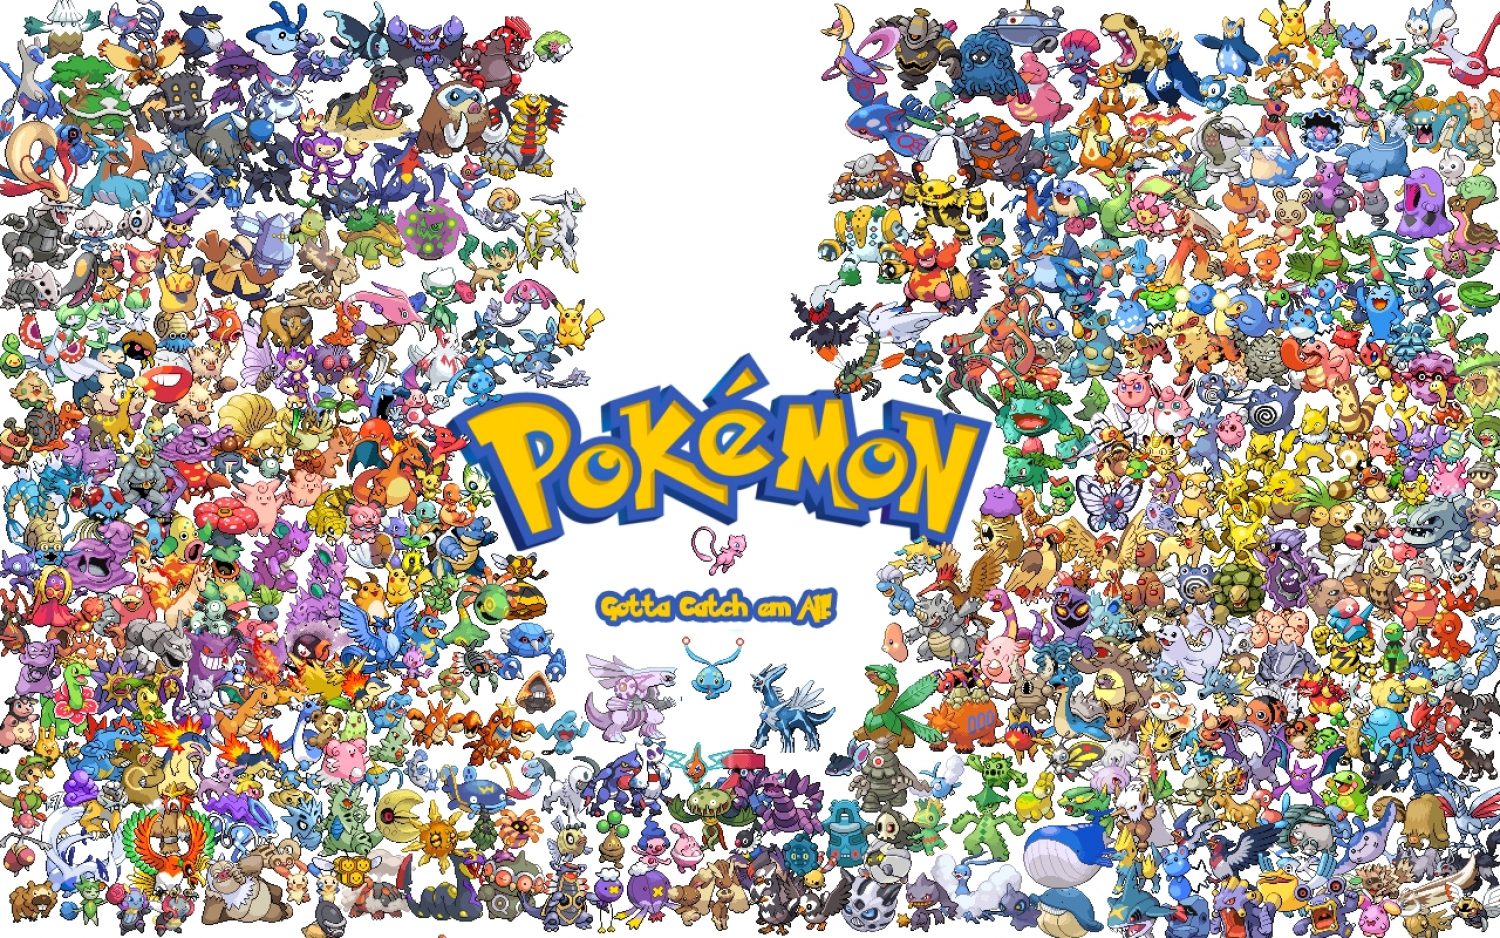 Japan voted on their favorite pokémon and the results are in!